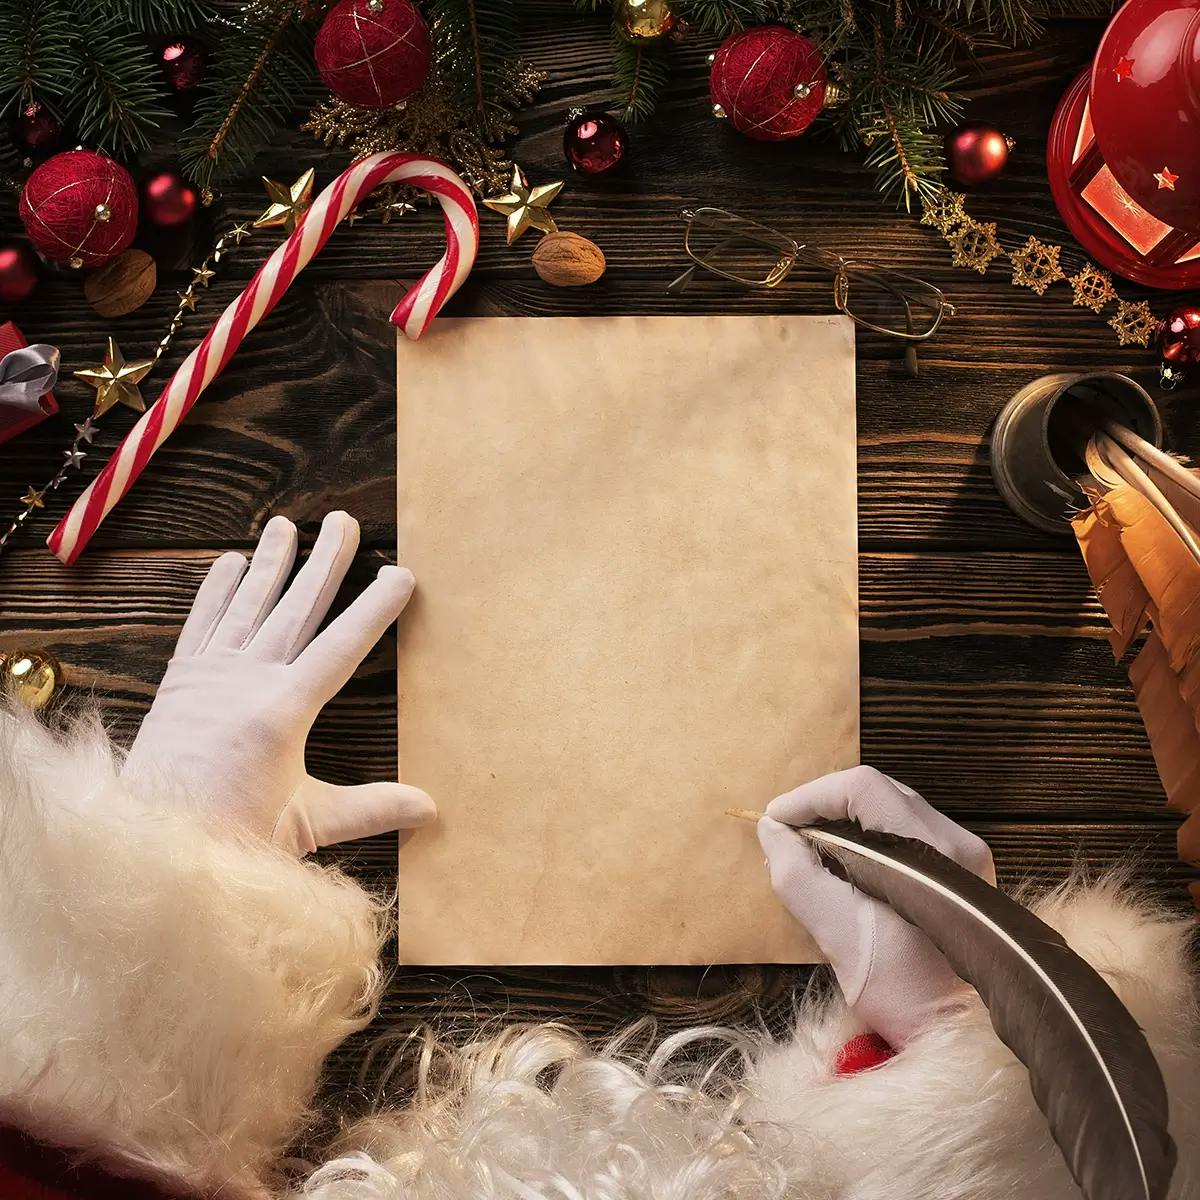 Santa’s gloved hands holding a quill pen, writing on a piece of parchment paper surrounded by holiday festive adornments and candy canes.